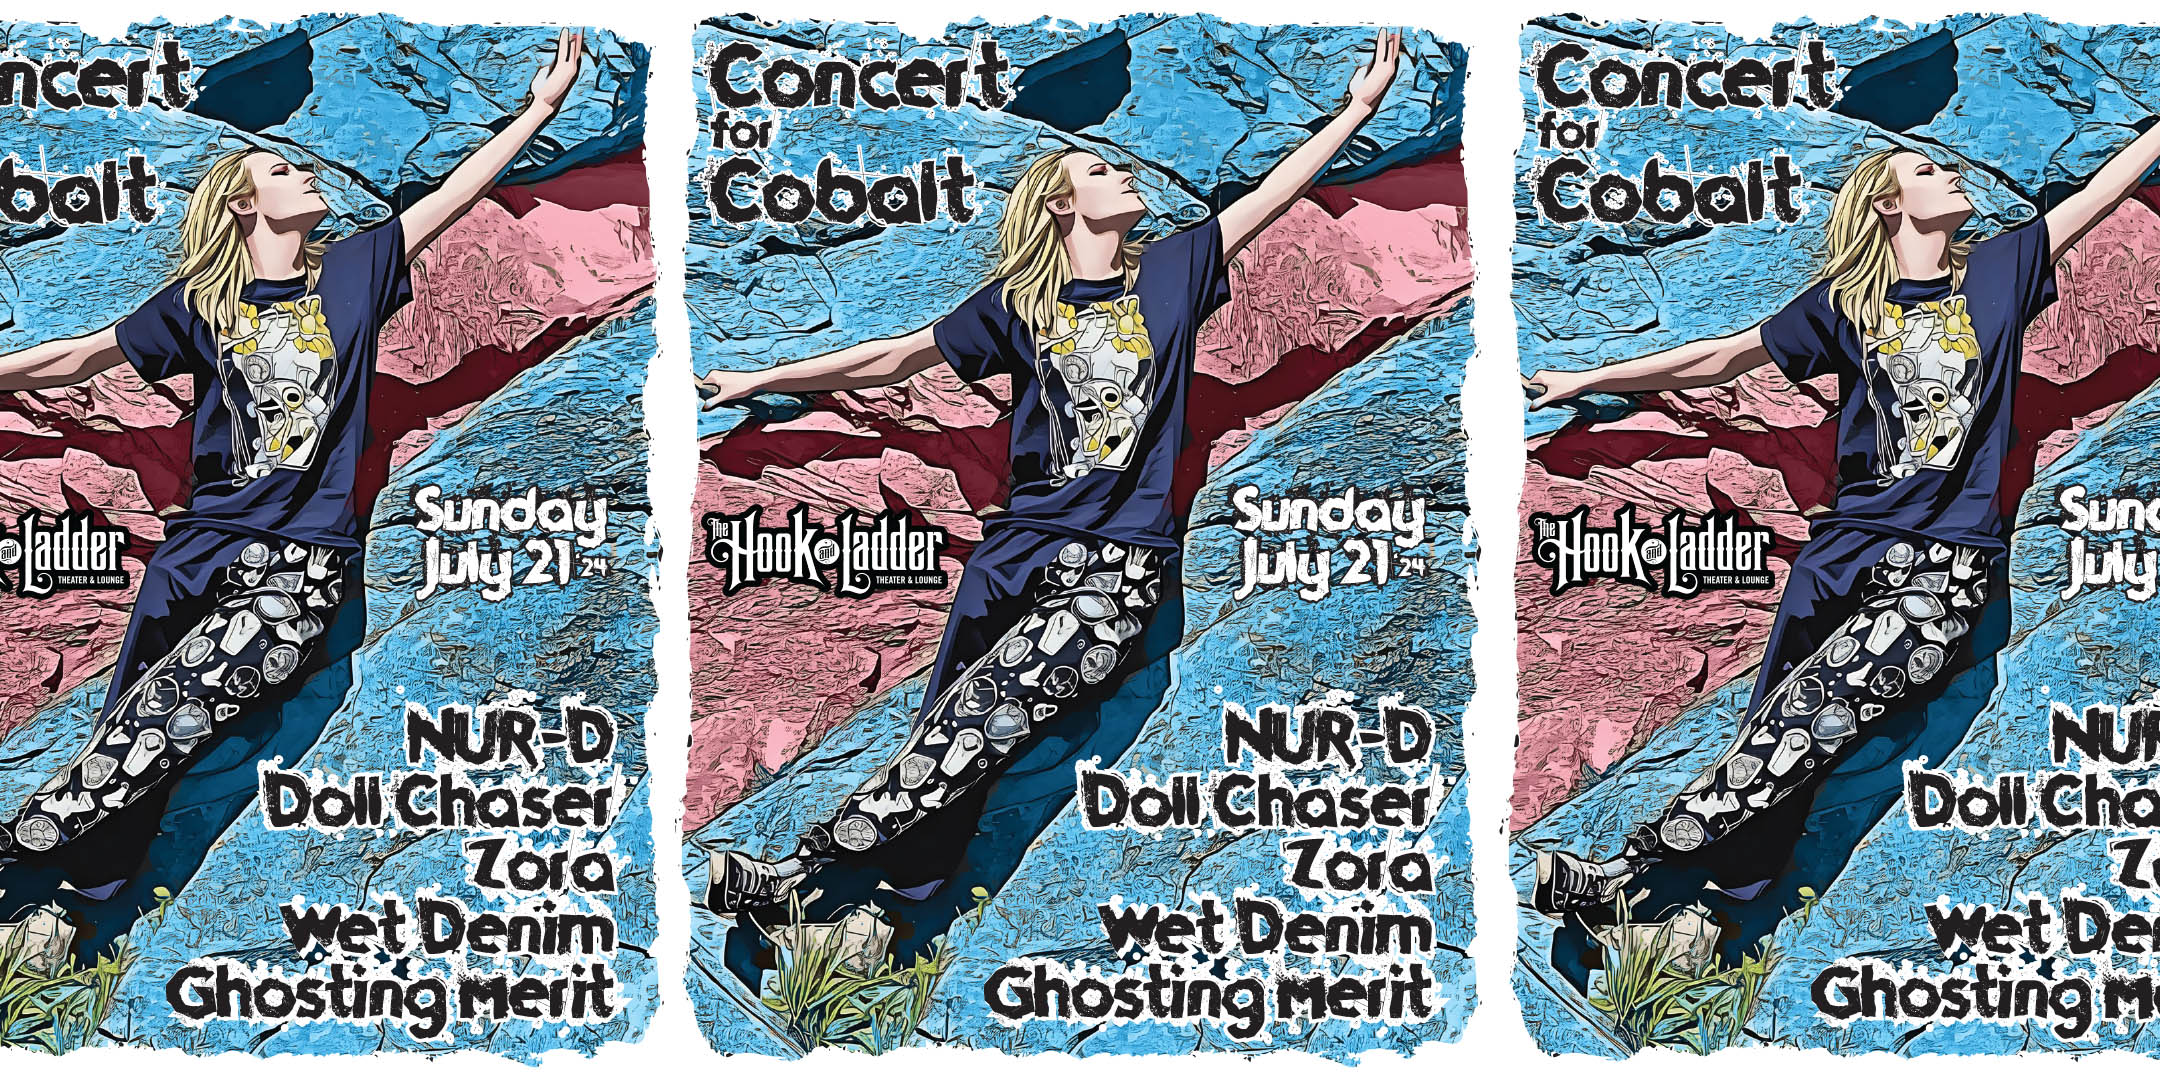 Concert for Cobalt with NUR-D, Doll Chaser, Zora, Wet Denim, & Ghosting Merit Sunday, July 21 The Hook and Ladder Theater Doors 3:00 :: Music 3:30pm :: All Ages Give What You Can Ticket Pricing